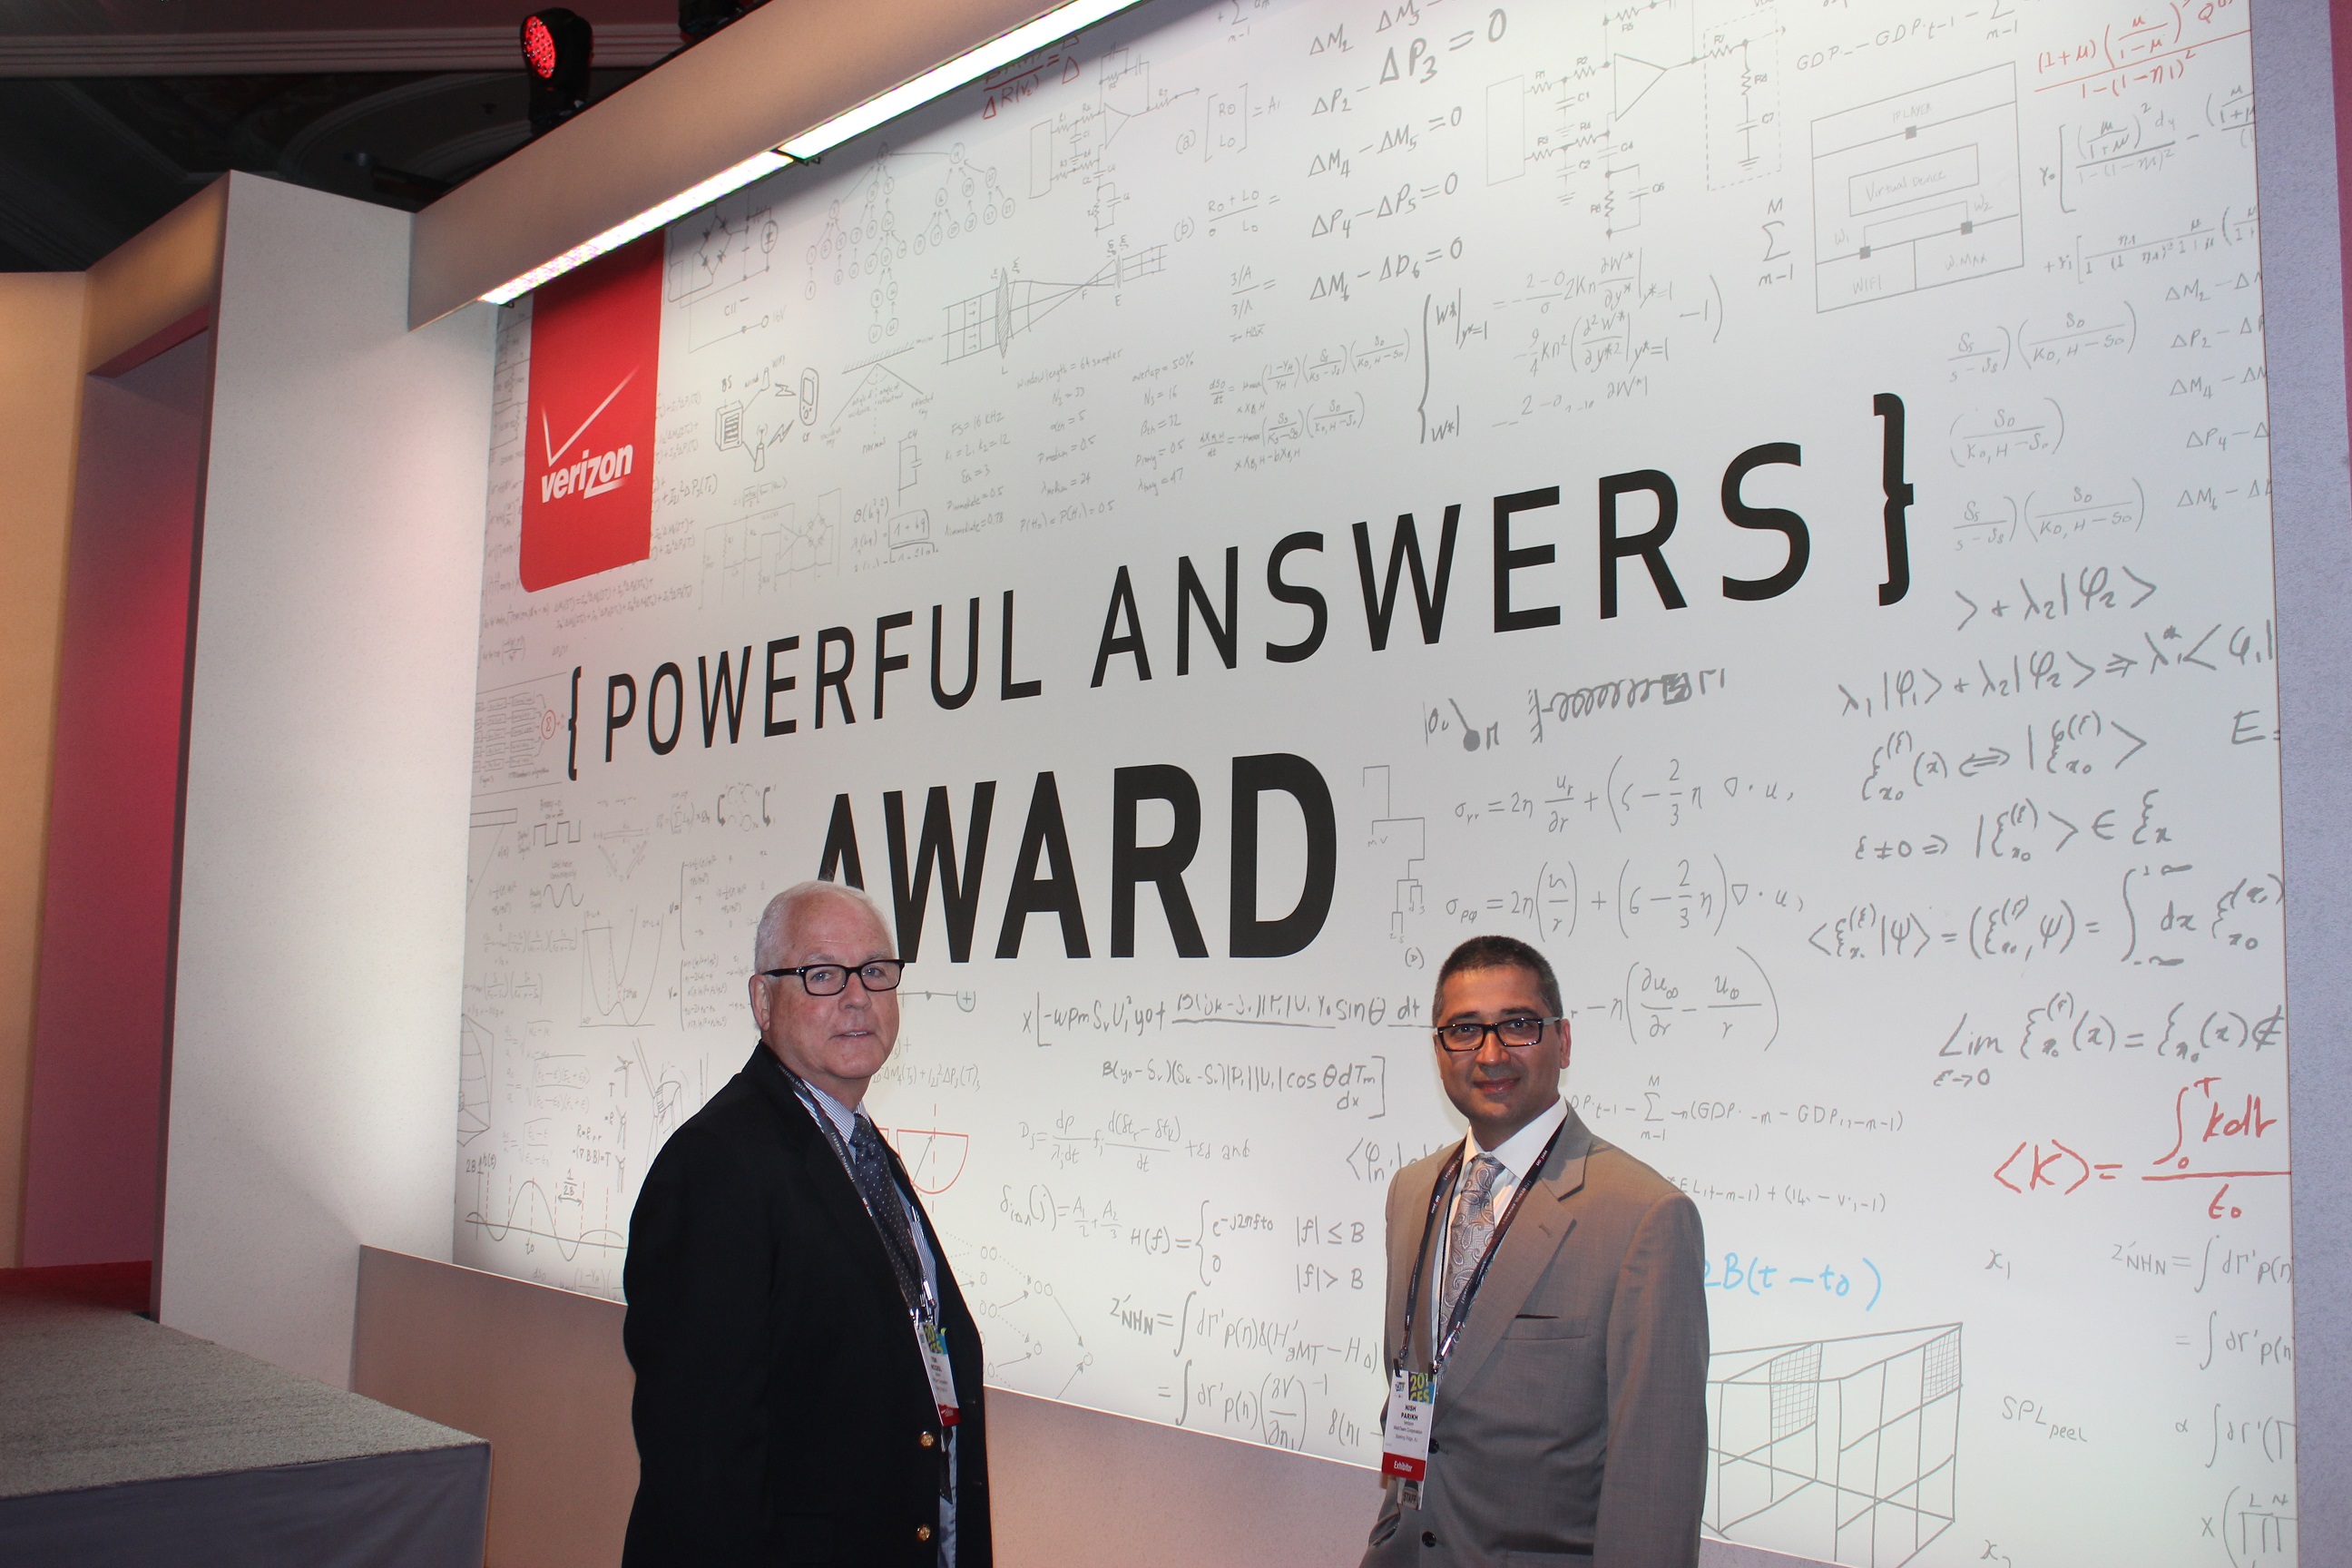 Tom McCool (left) and Nish Parikh (right) at Verizon Powerful Answers Award Contest at the 2014 International CES in Las Vegas